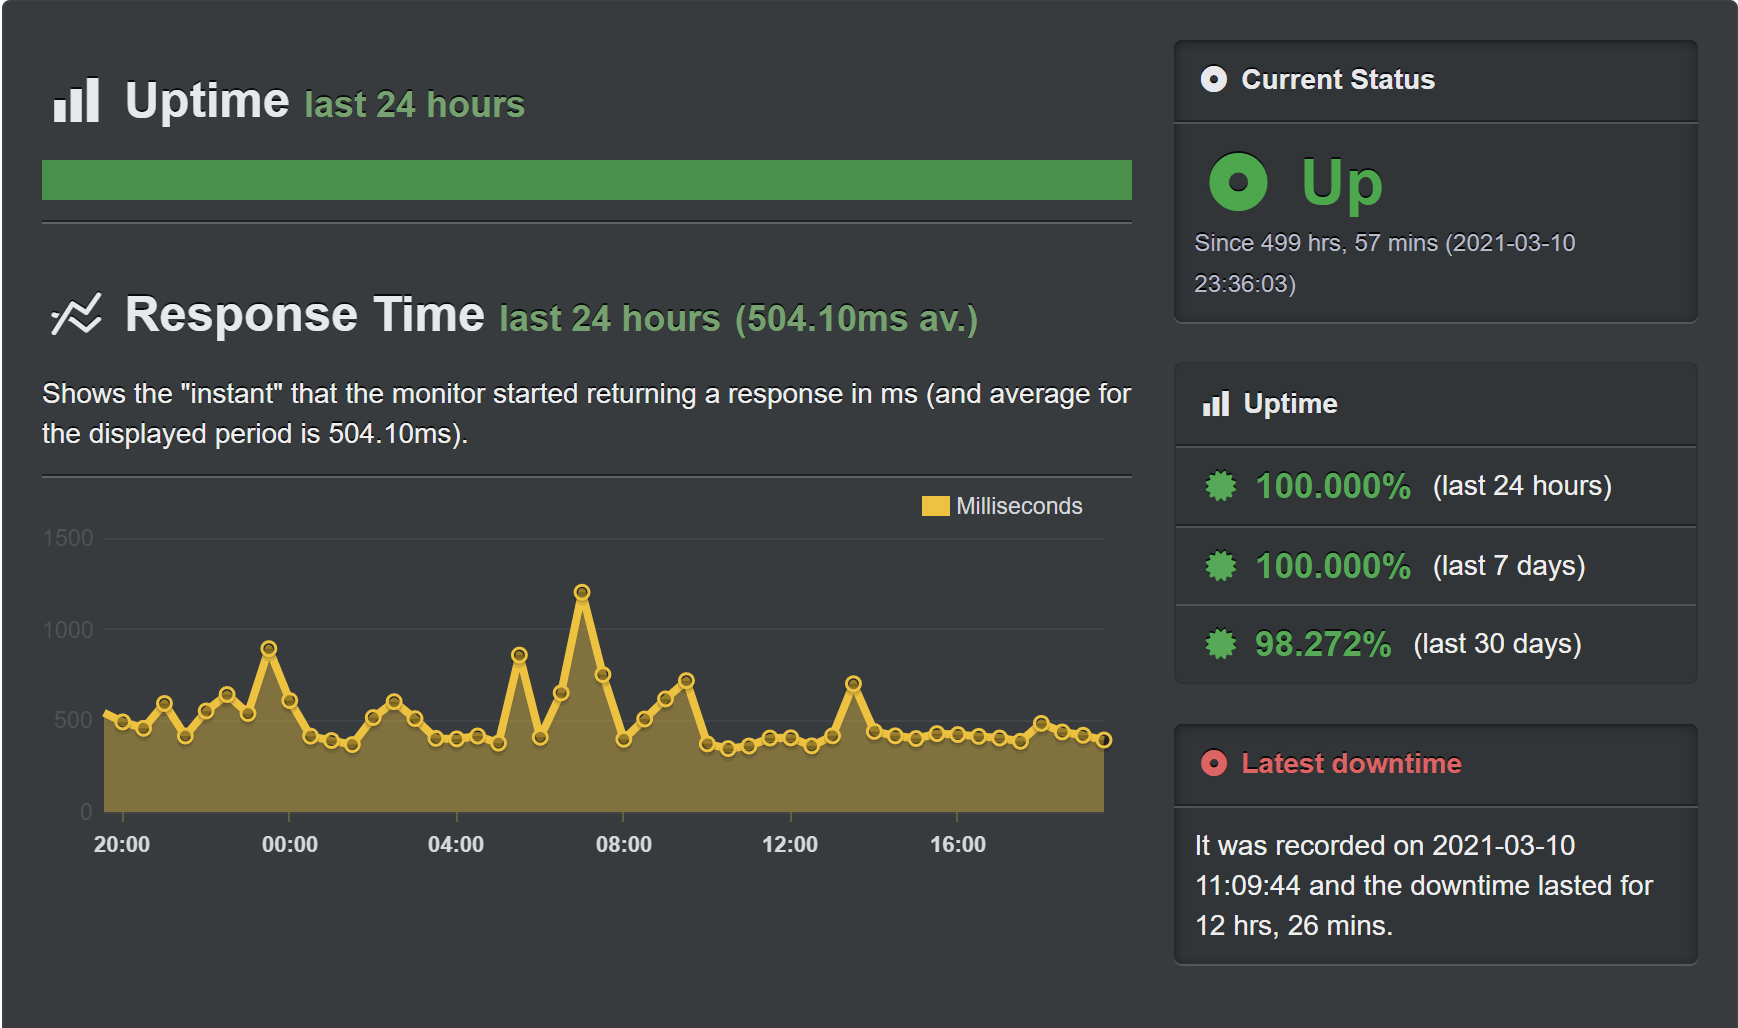 Speed and uptime 